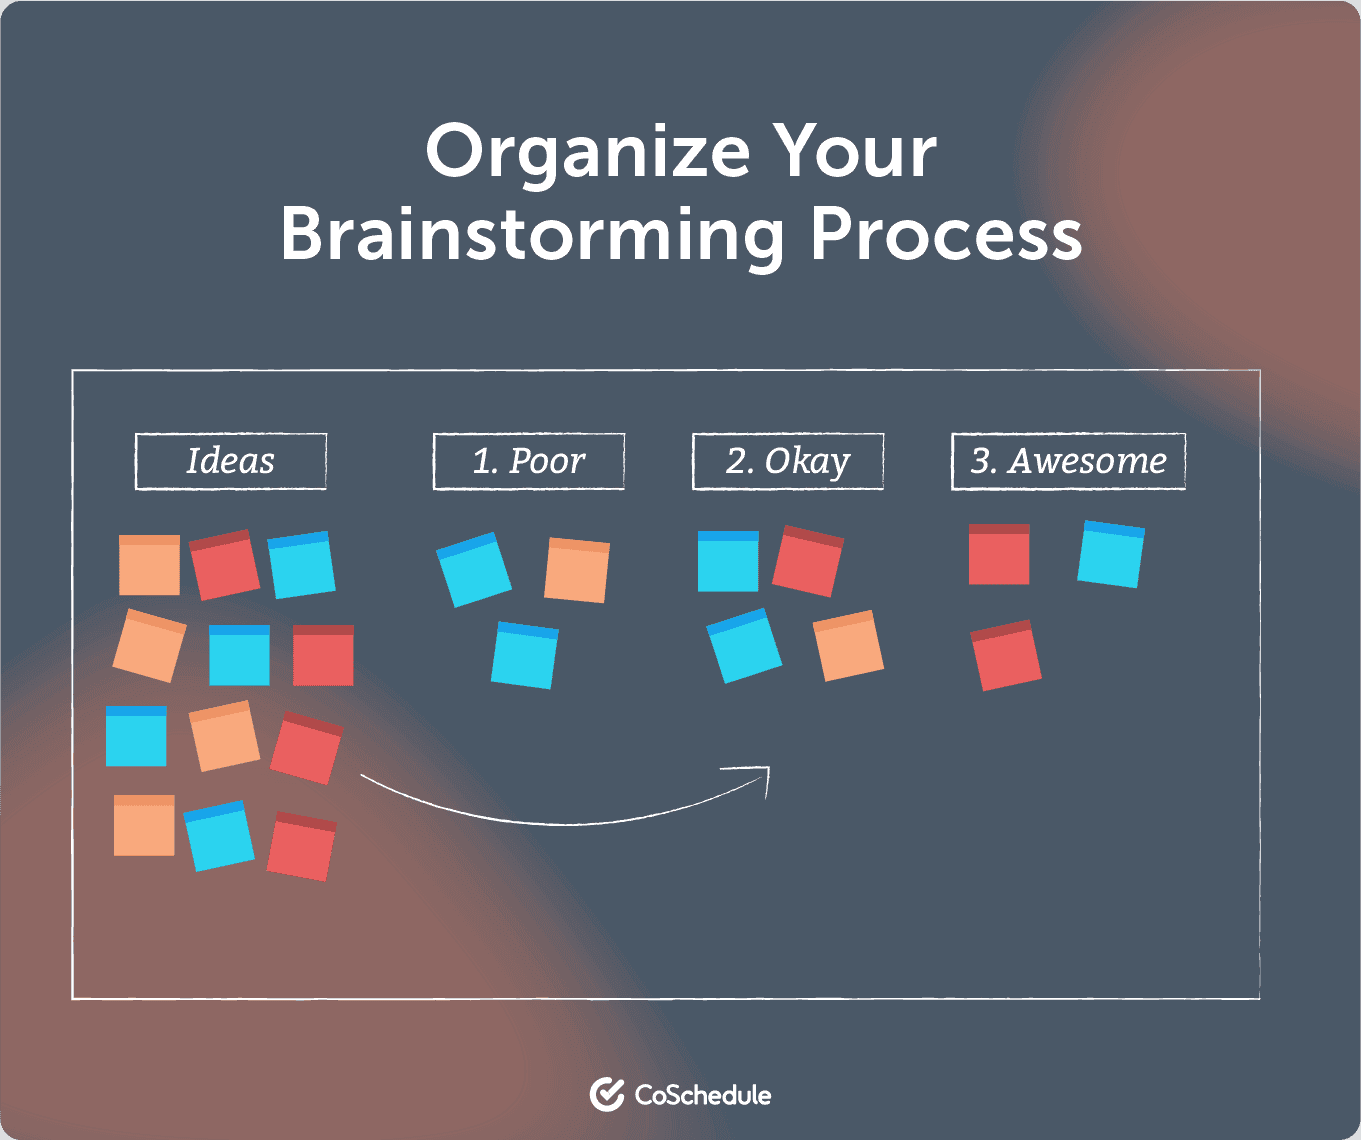 Organization of brainstorming ideas and the process 